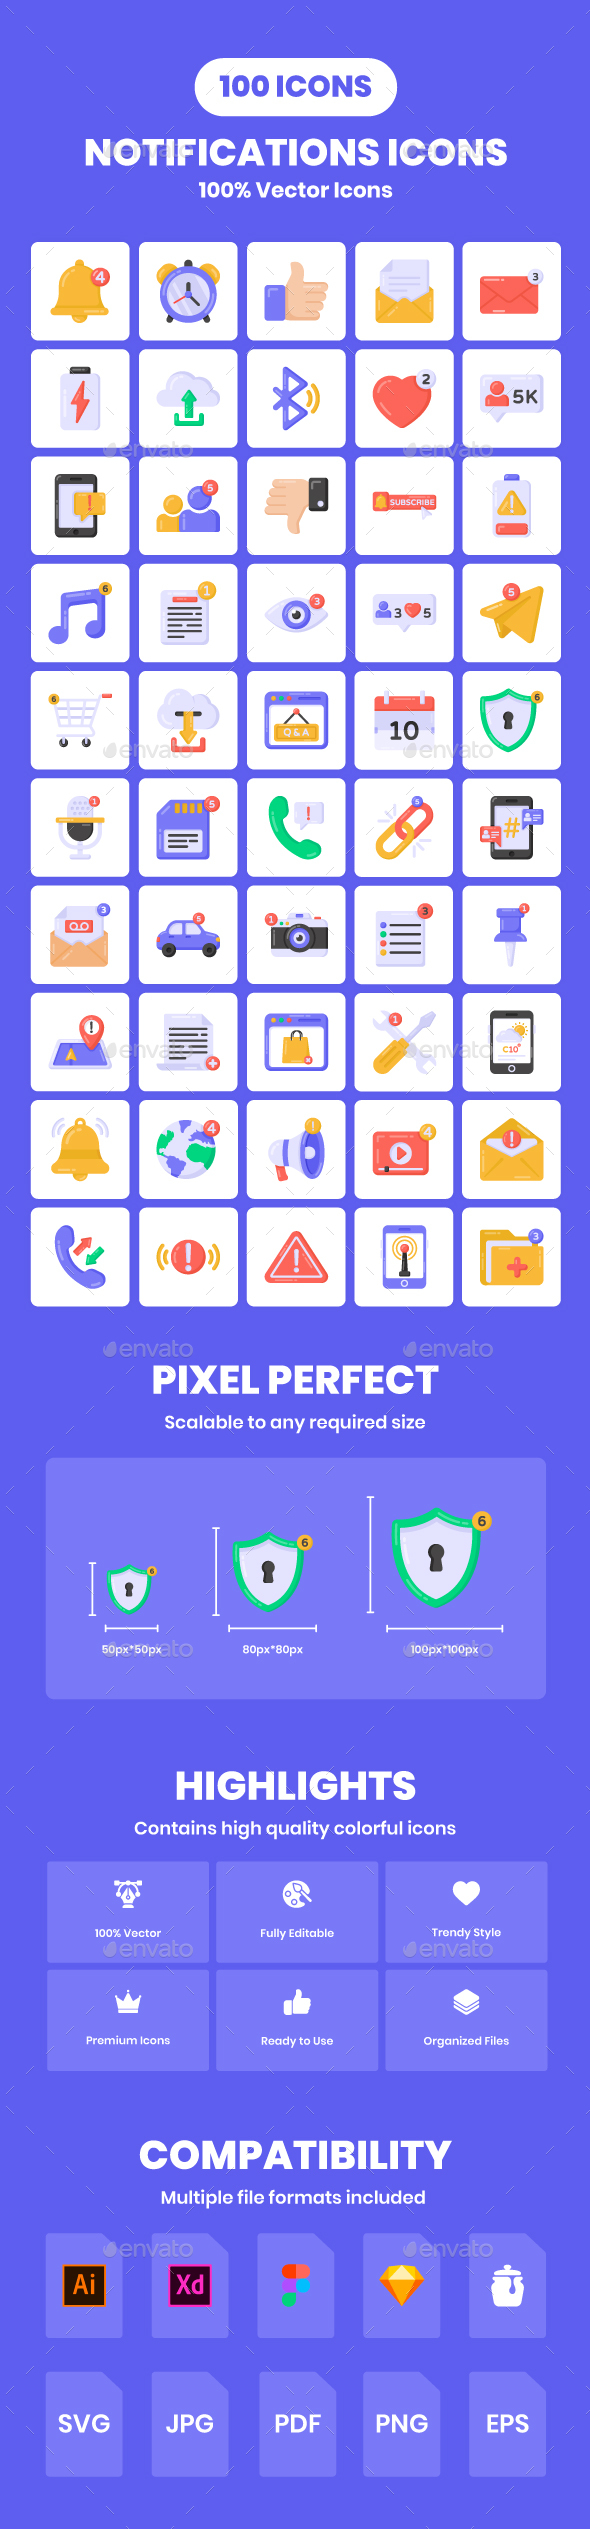 [DOWNLOAD]100 Flat Detailed Notifications Icons